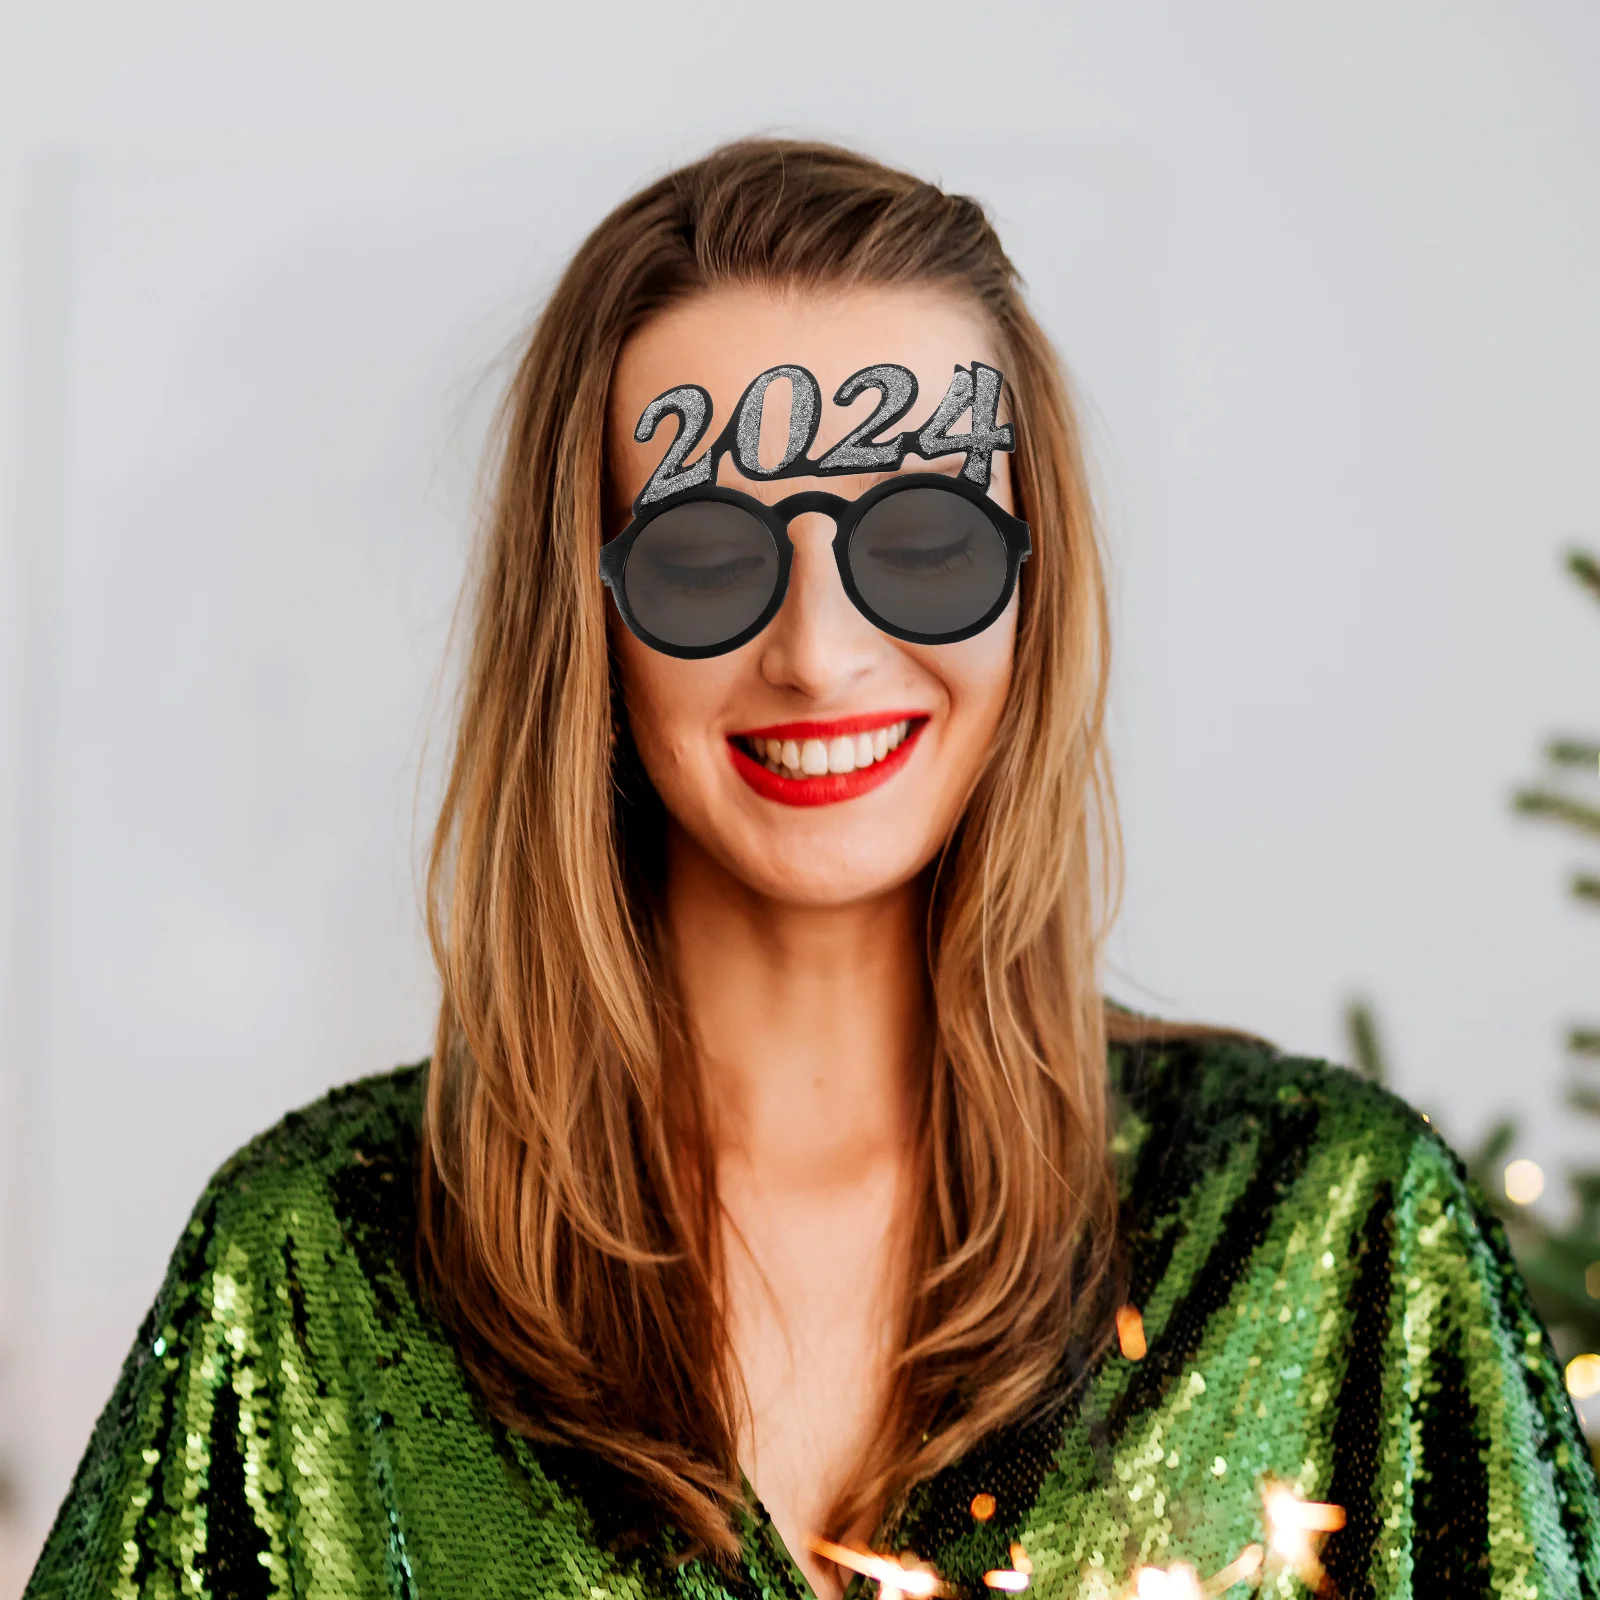 

Number Eyeglass New Year Party Funny Glass Novelty 2024 Eyewear Photo Prop